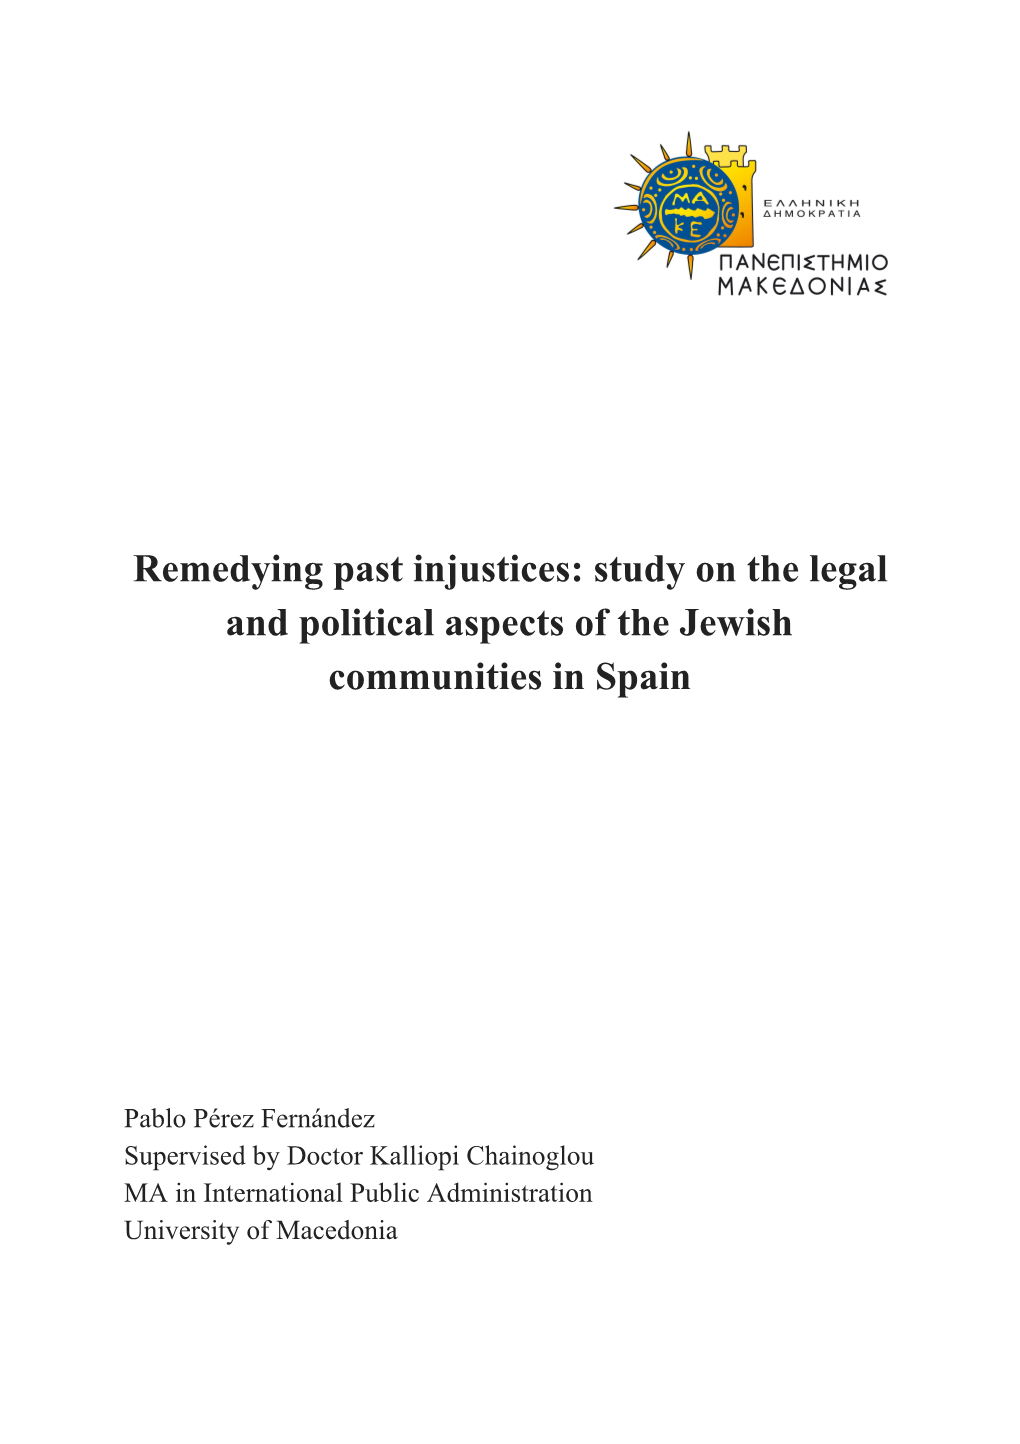 Study on the Legal and Political Aspects of the Jewish Communities in Spain